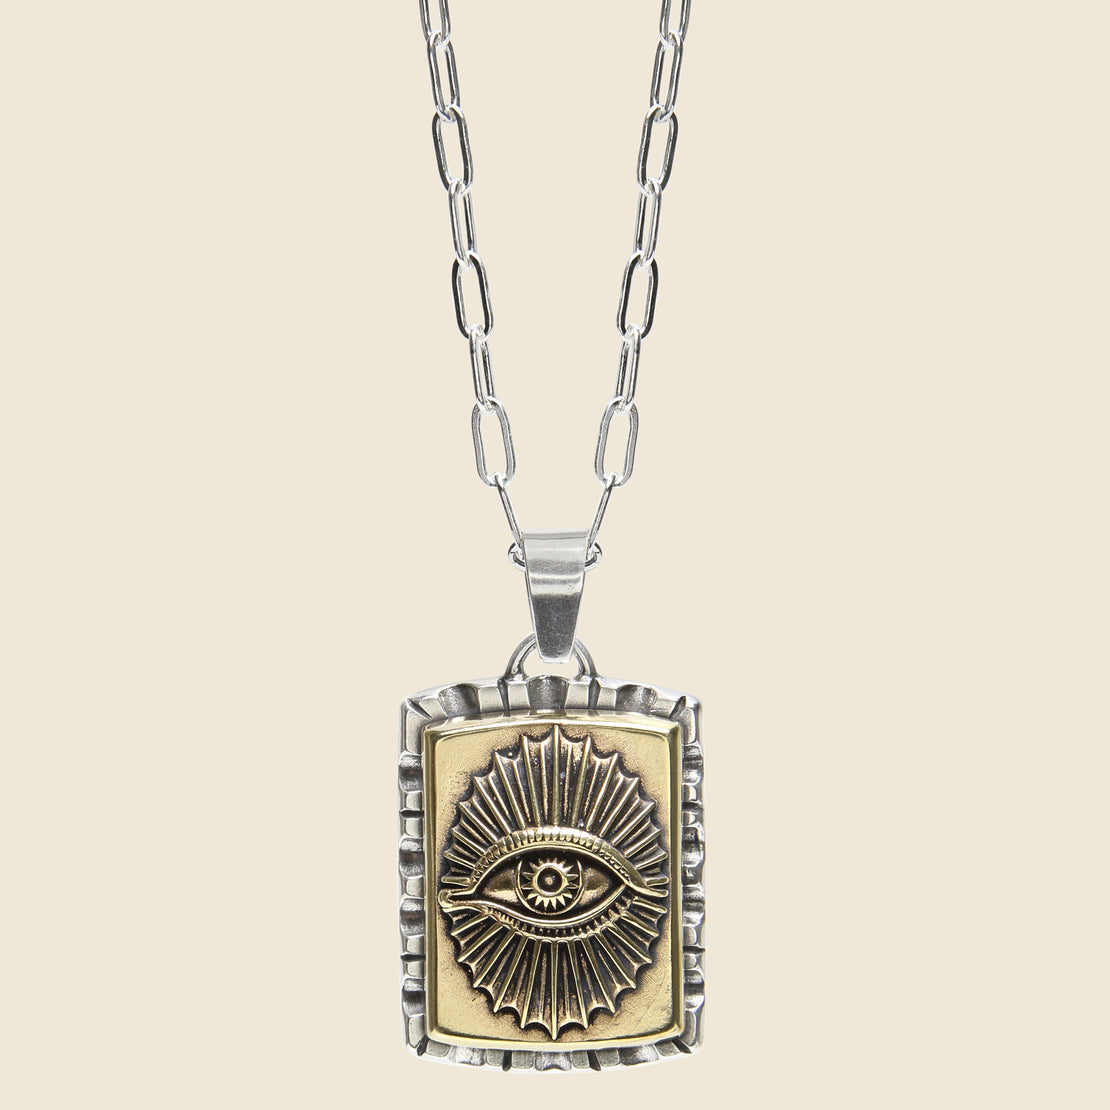 LHN Jewelry All Seeing Eye Souvenir Necklace - Silver/Brass